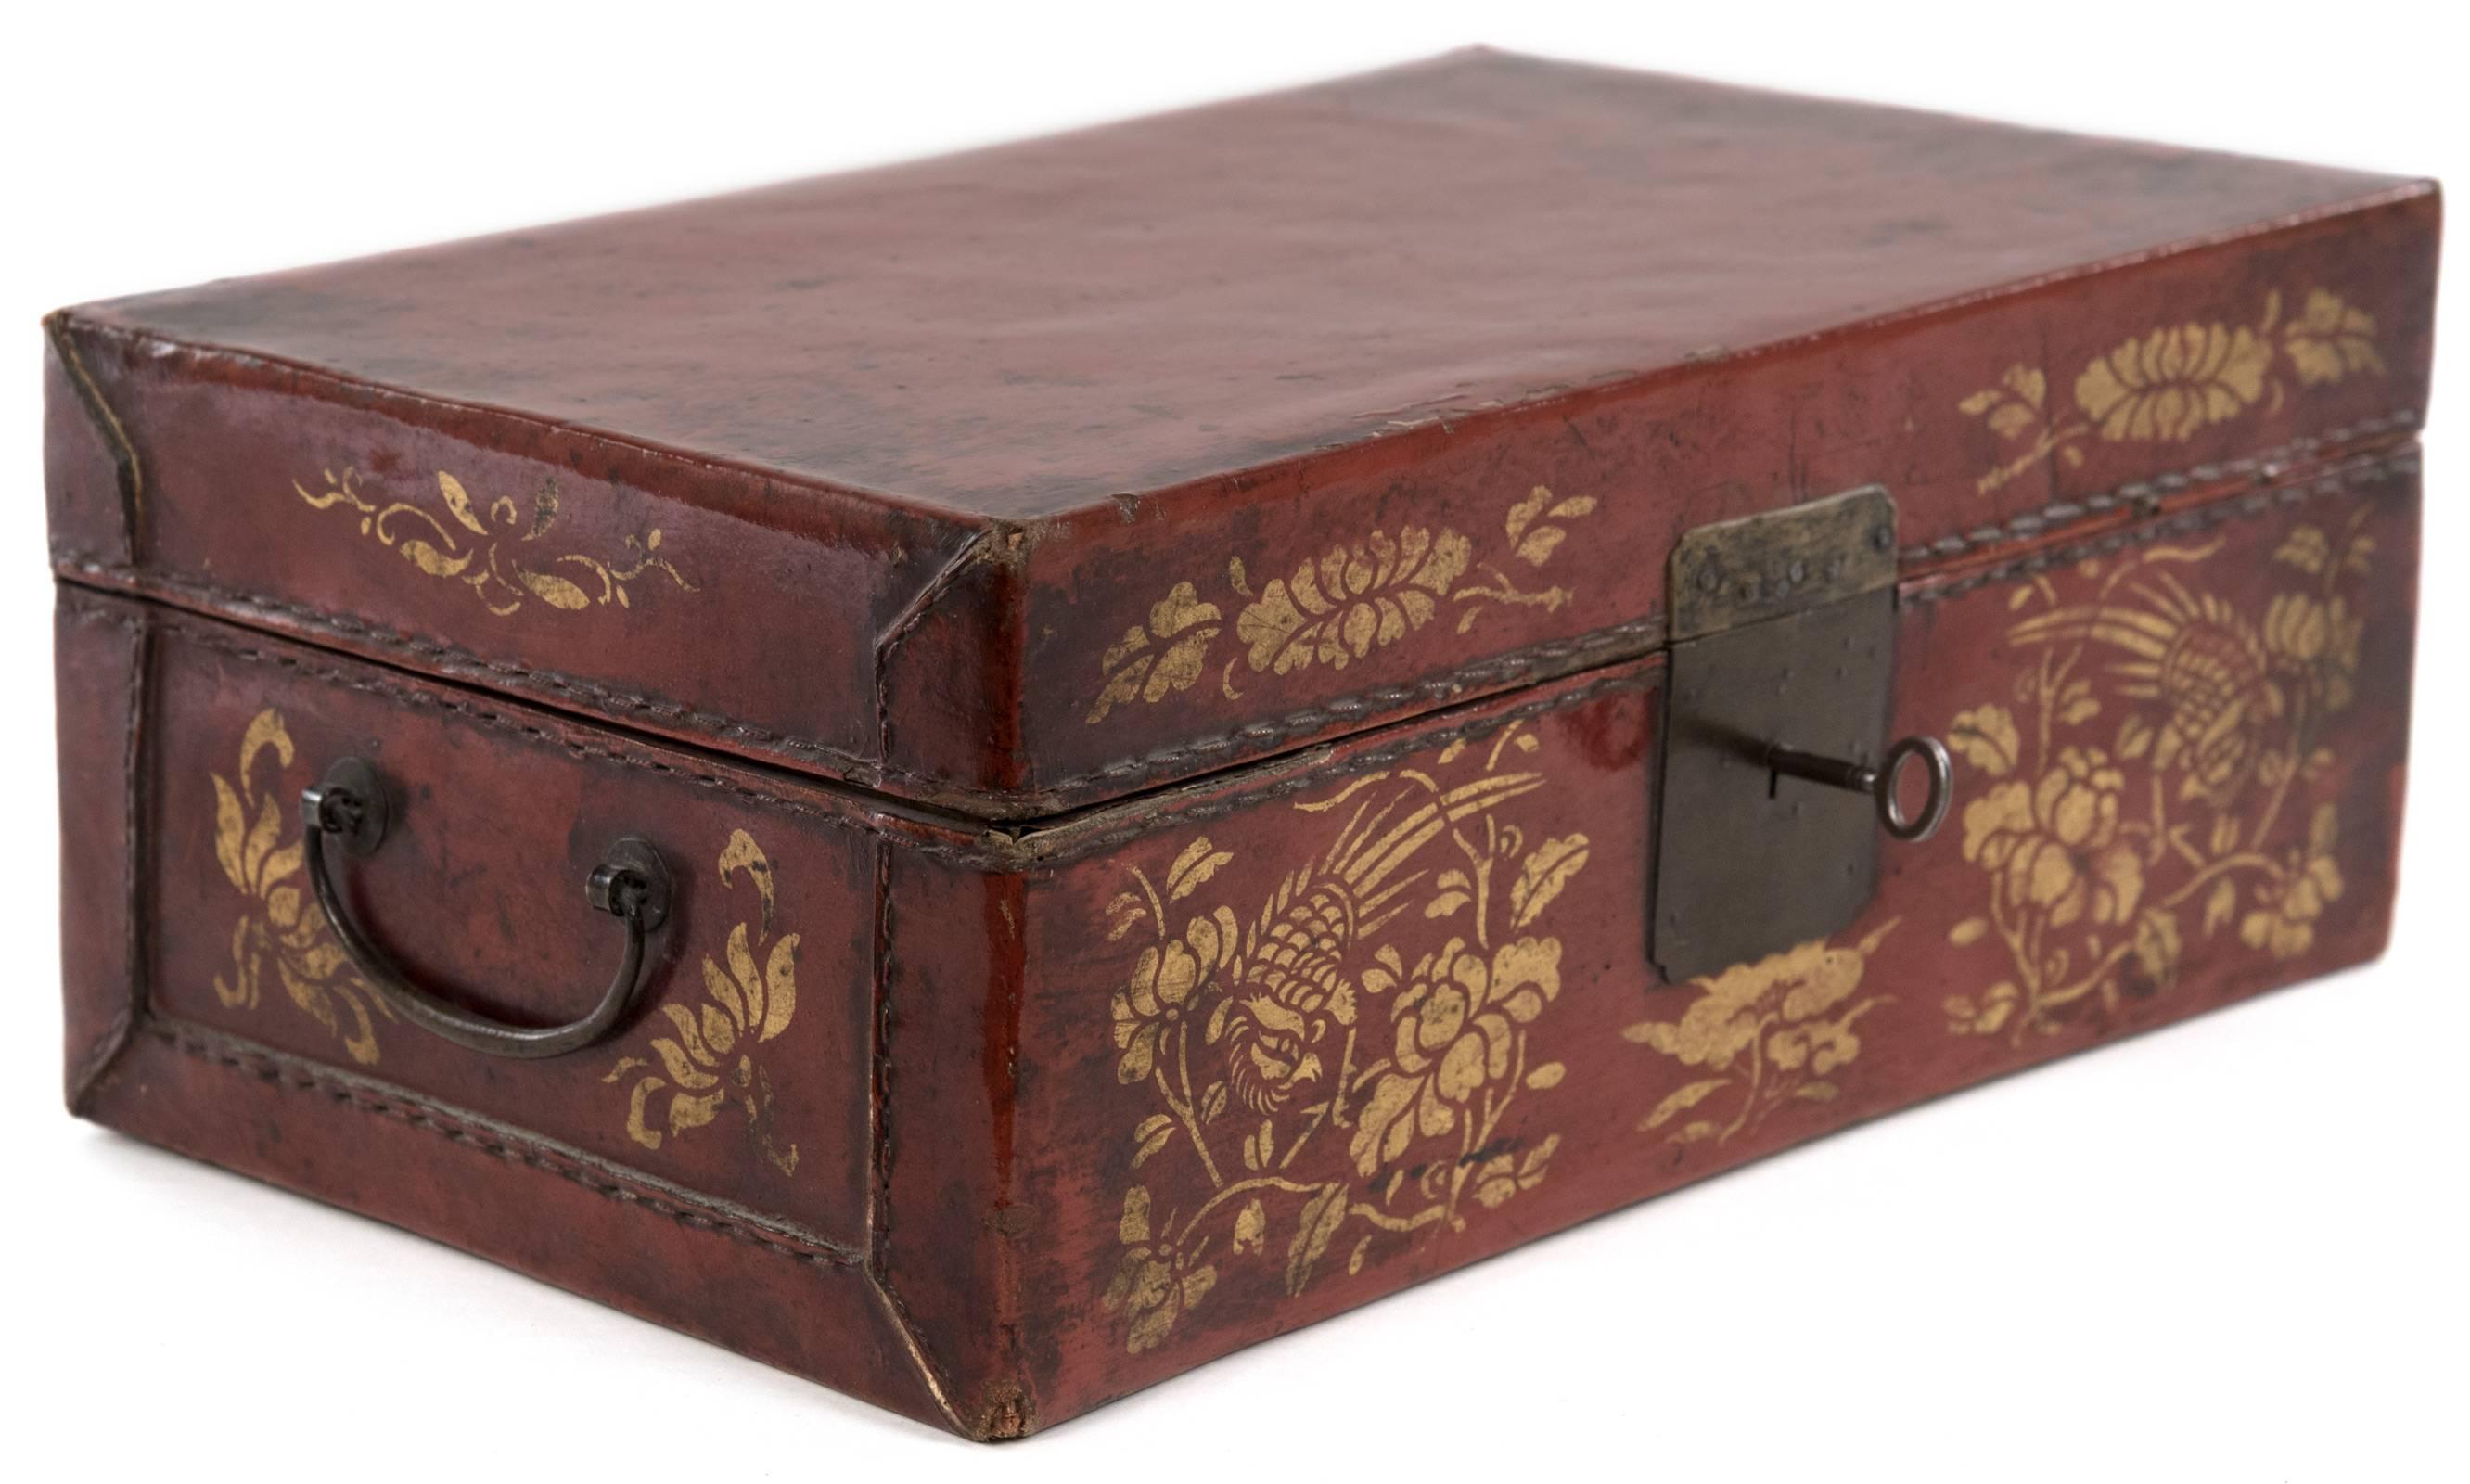 A Chinese stitched red leather box with hinged lid, applied painted distress marks and gold-stamped foliate ornamentation; brass handles and lock plate with key. Interior is comprised of one large compartment that is lined with white material.